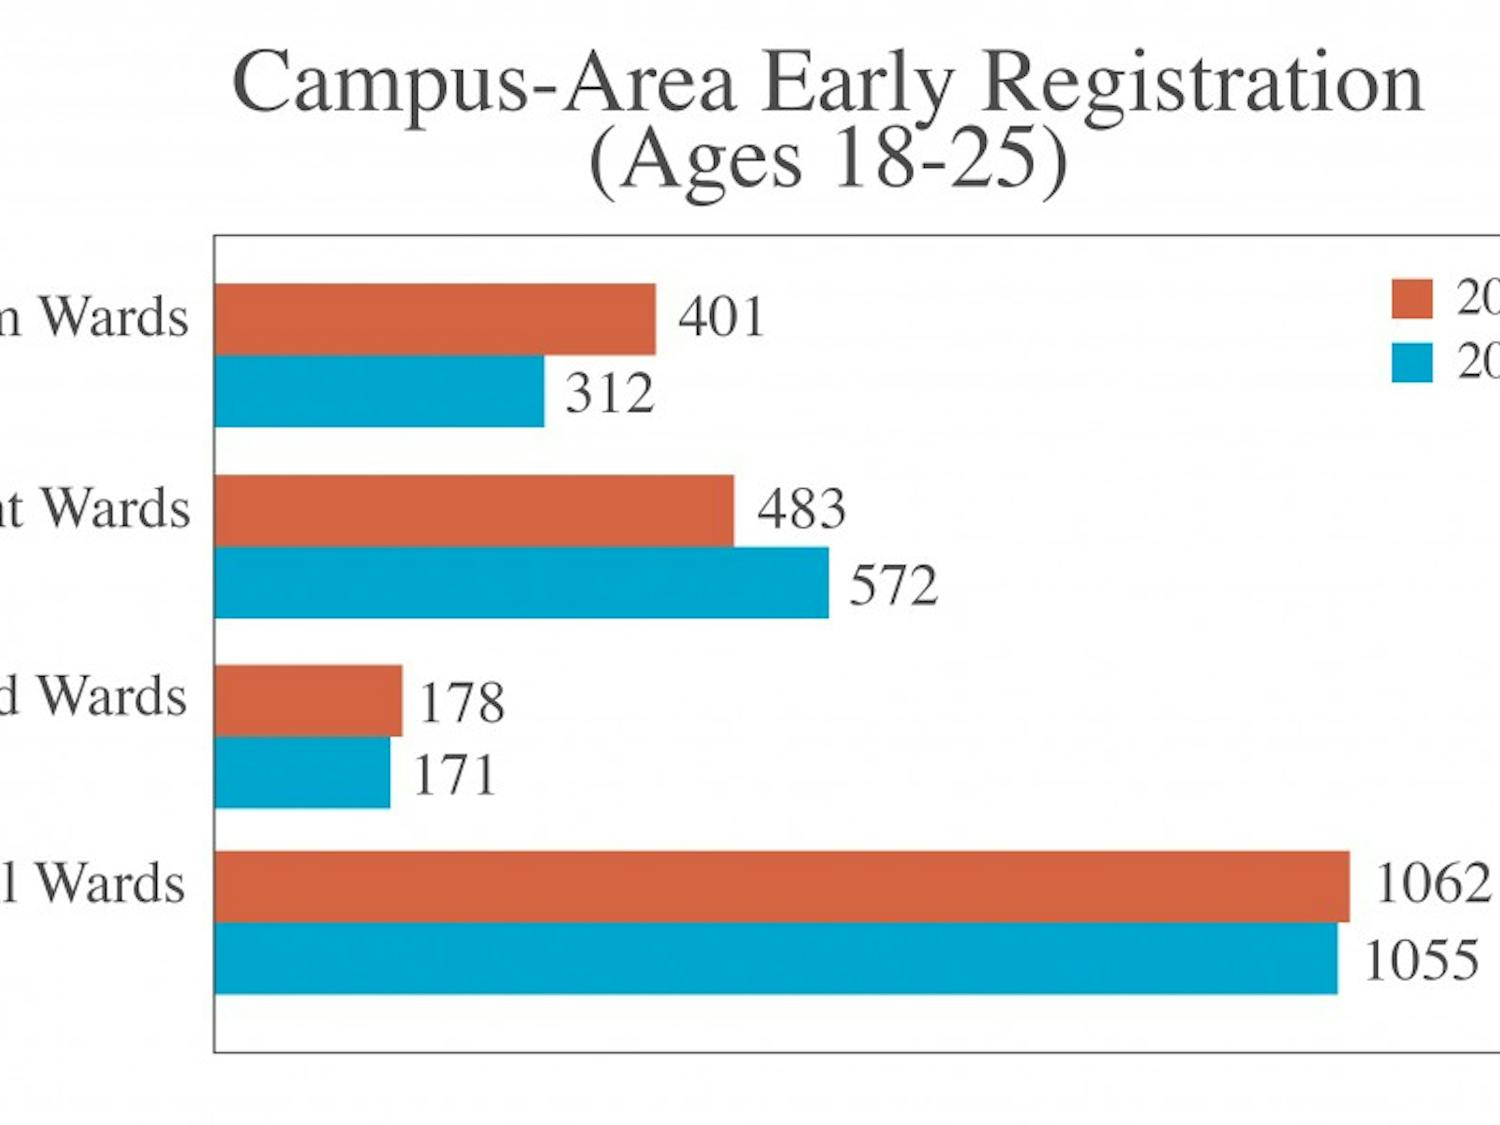 Voter registration on campus in 2018 is comparable to that of a presidential election year, which usually boasts much higher turnout.